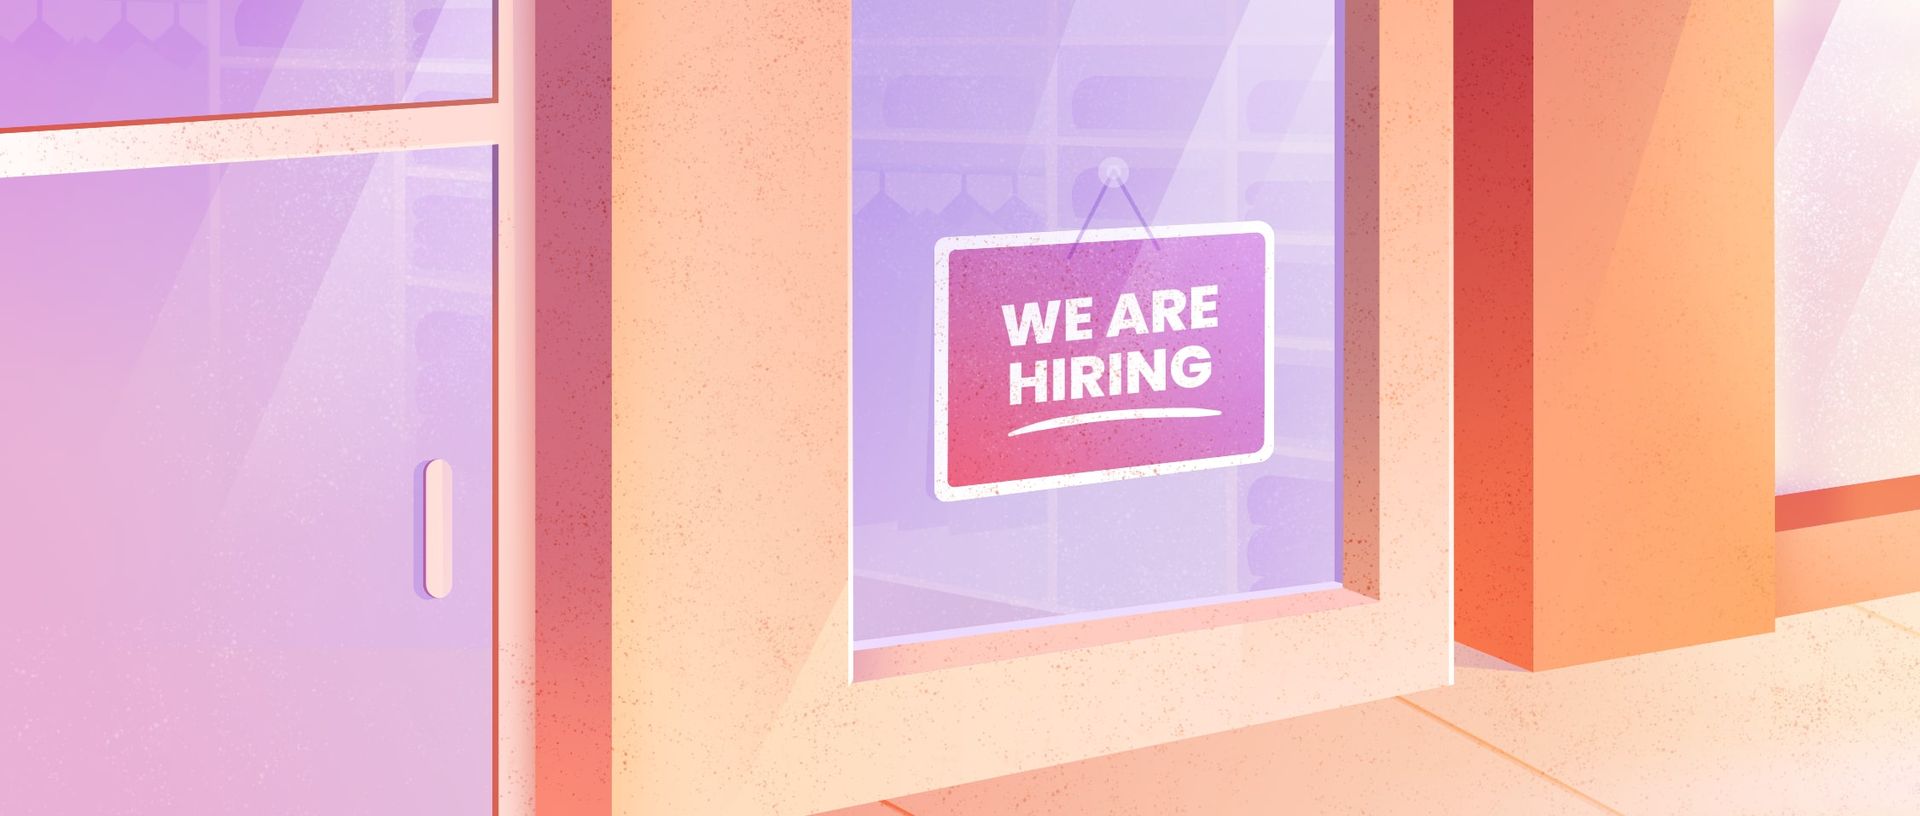 Window of a retail store with a help we are hiring sign